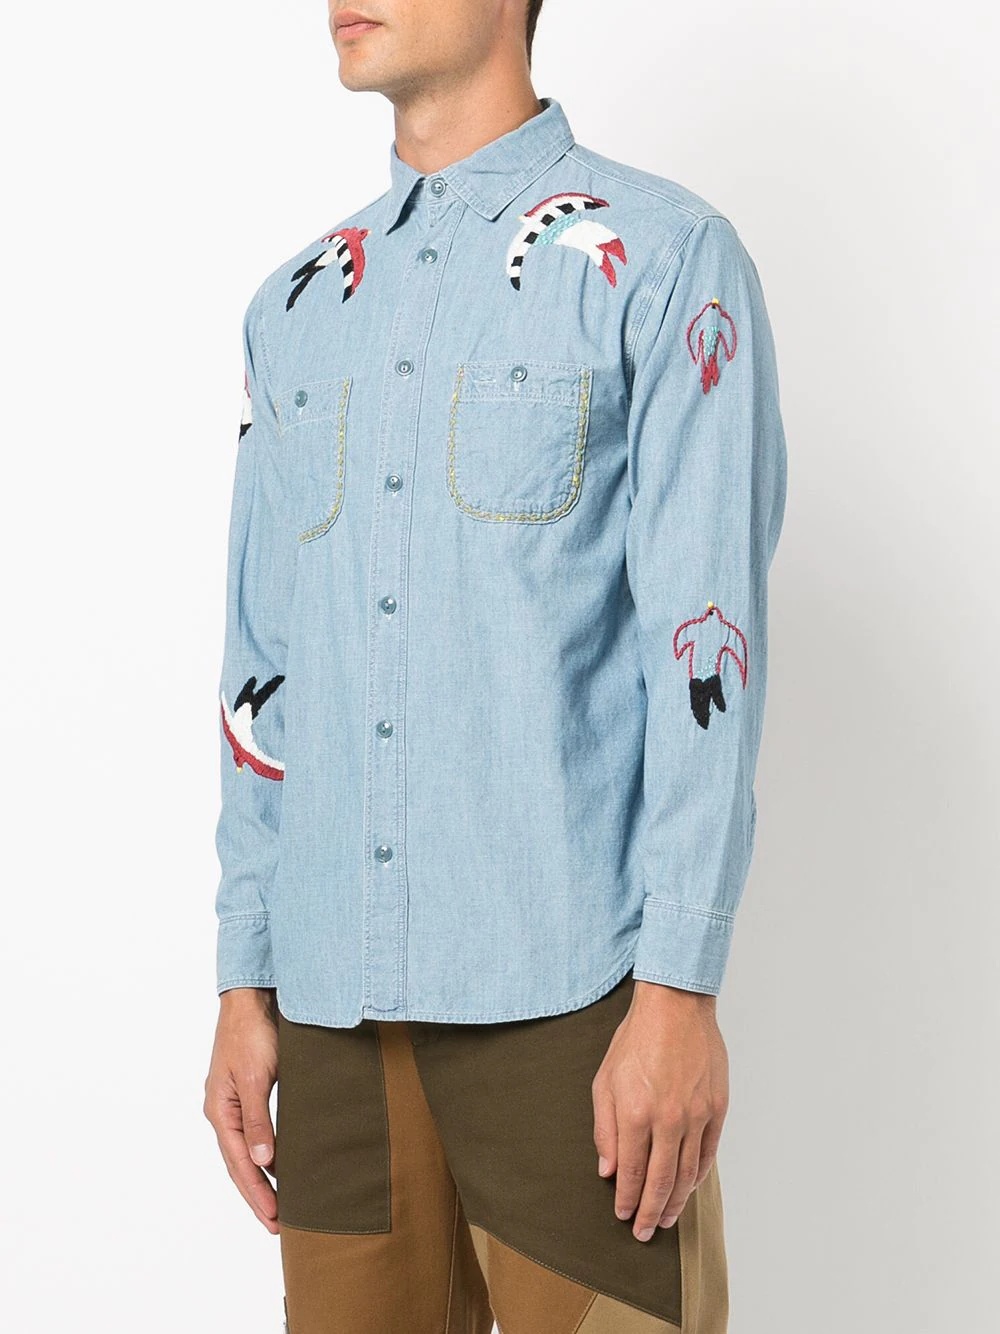 swallow-embroidered work shirt - 3